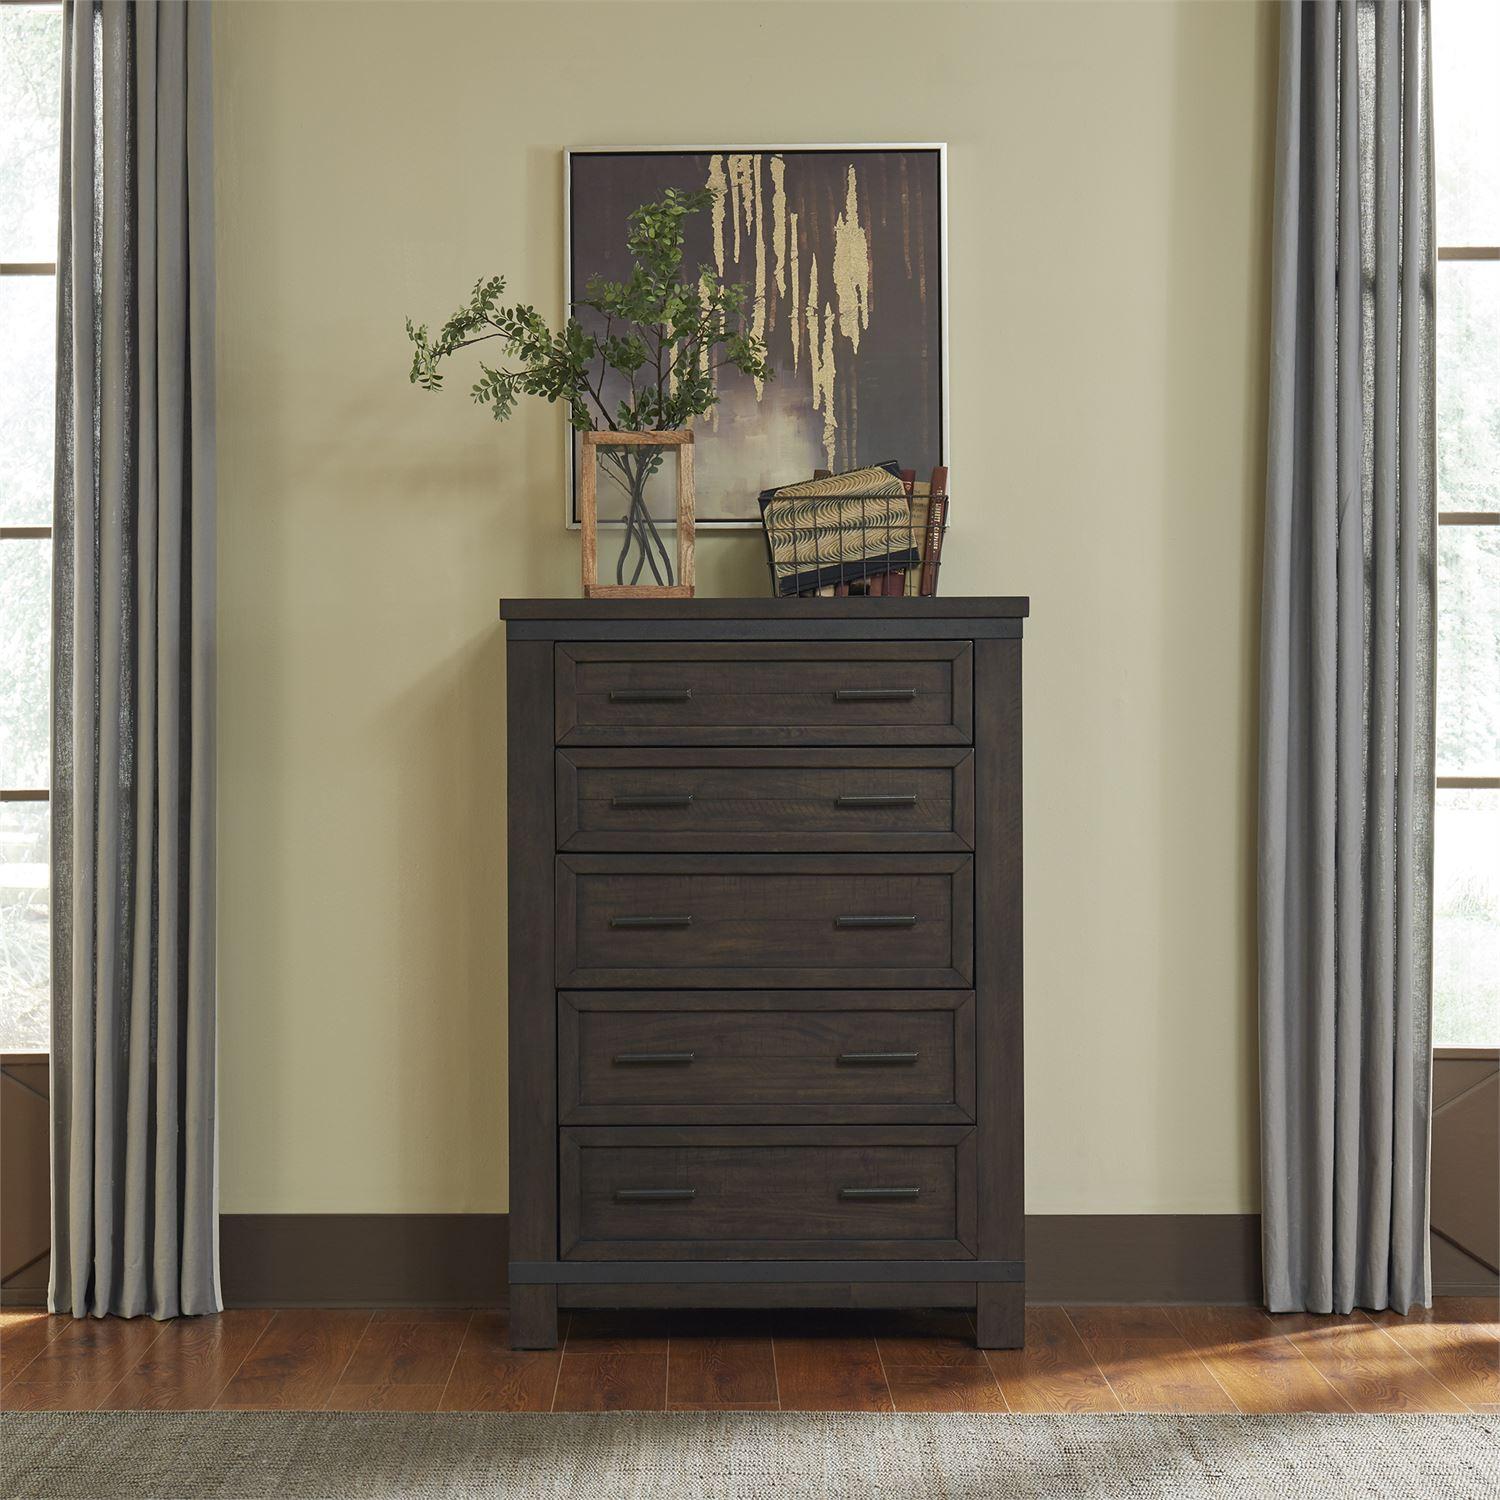 Rustic Bachelor Chest Thornwood Hills  (759-BR) Bachelor Chest 759-BR41 in Gray 